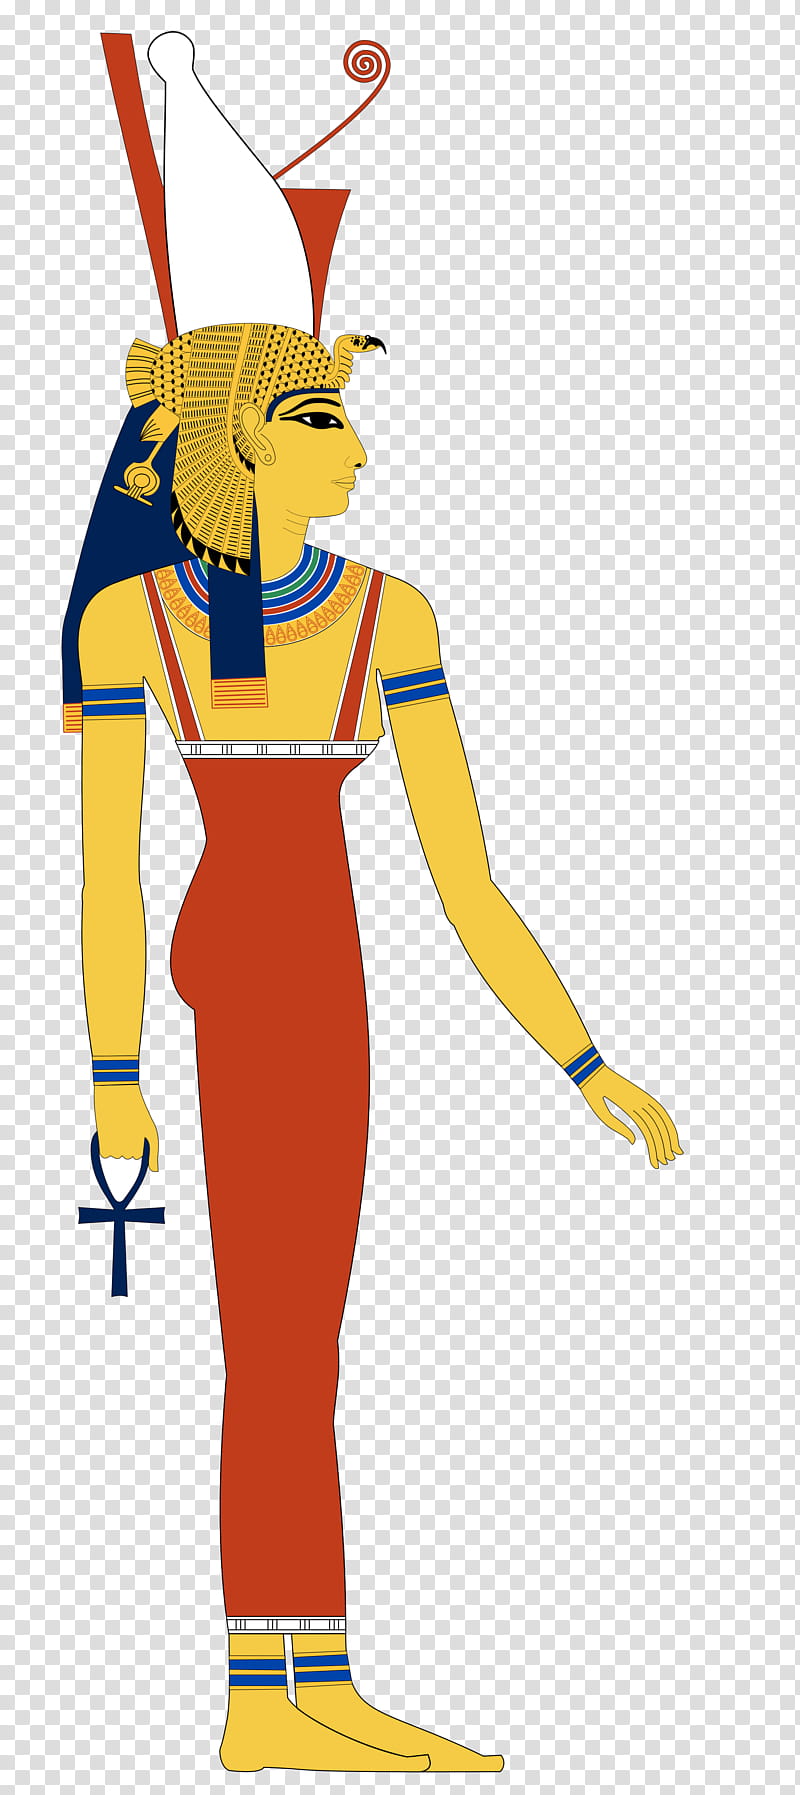 Ancient Egypt, Isis, Ancient Egyptian Deities, Ancient Egyptian Religion, Art Of Ancient Egypt, Osiris, Deity, Goddess transparent background PNG clipart